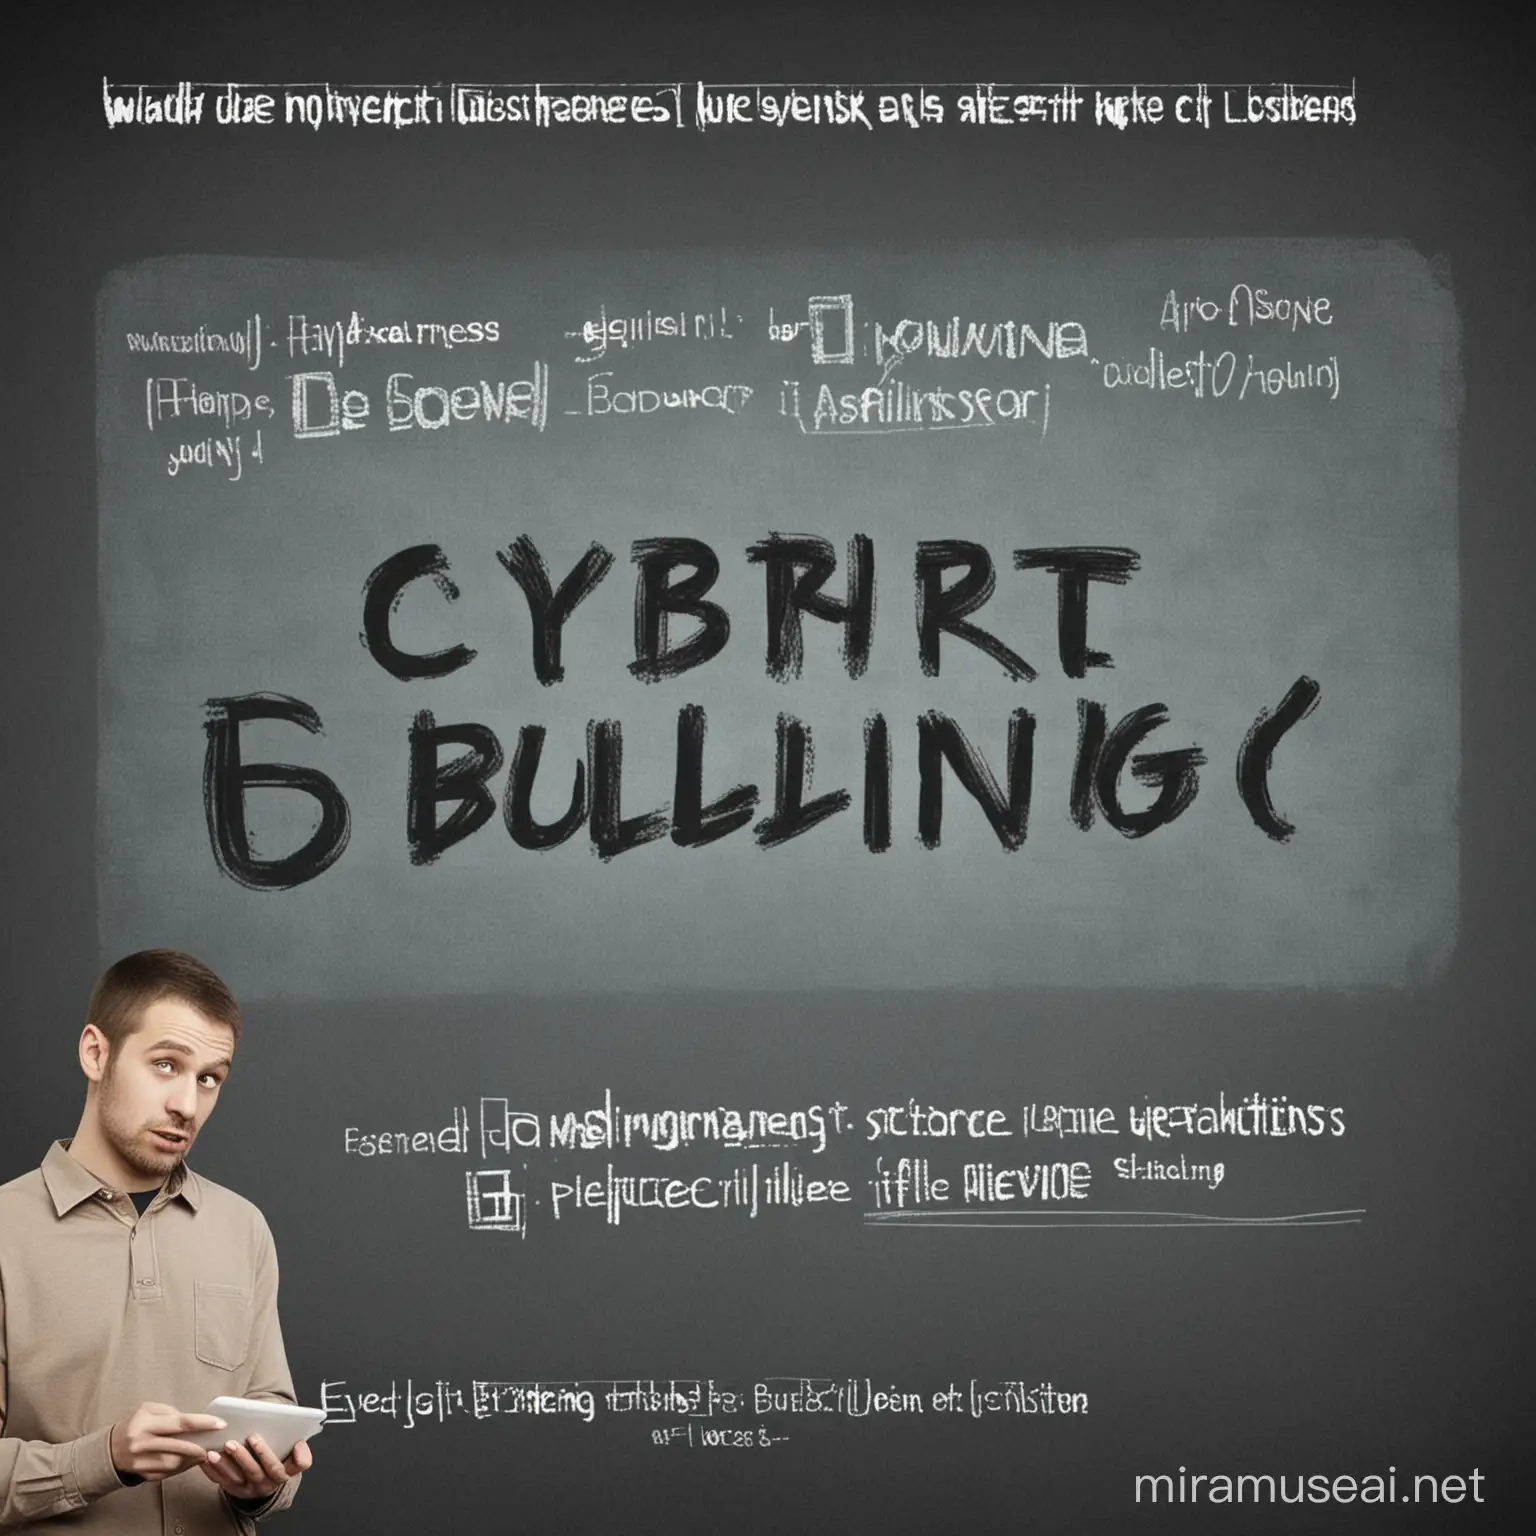 Understanding Cyberbullying**
  - Cyberbullying can take various forms, including:
    - Harassment: Repeated offensive, rude, and insulting messages or comments.
    - Cyberstalking: Persistent monitoring or surveillance of an individual's online activities.
    - Trolling: Deliberate provocation or disruption of online discussions for amusement.